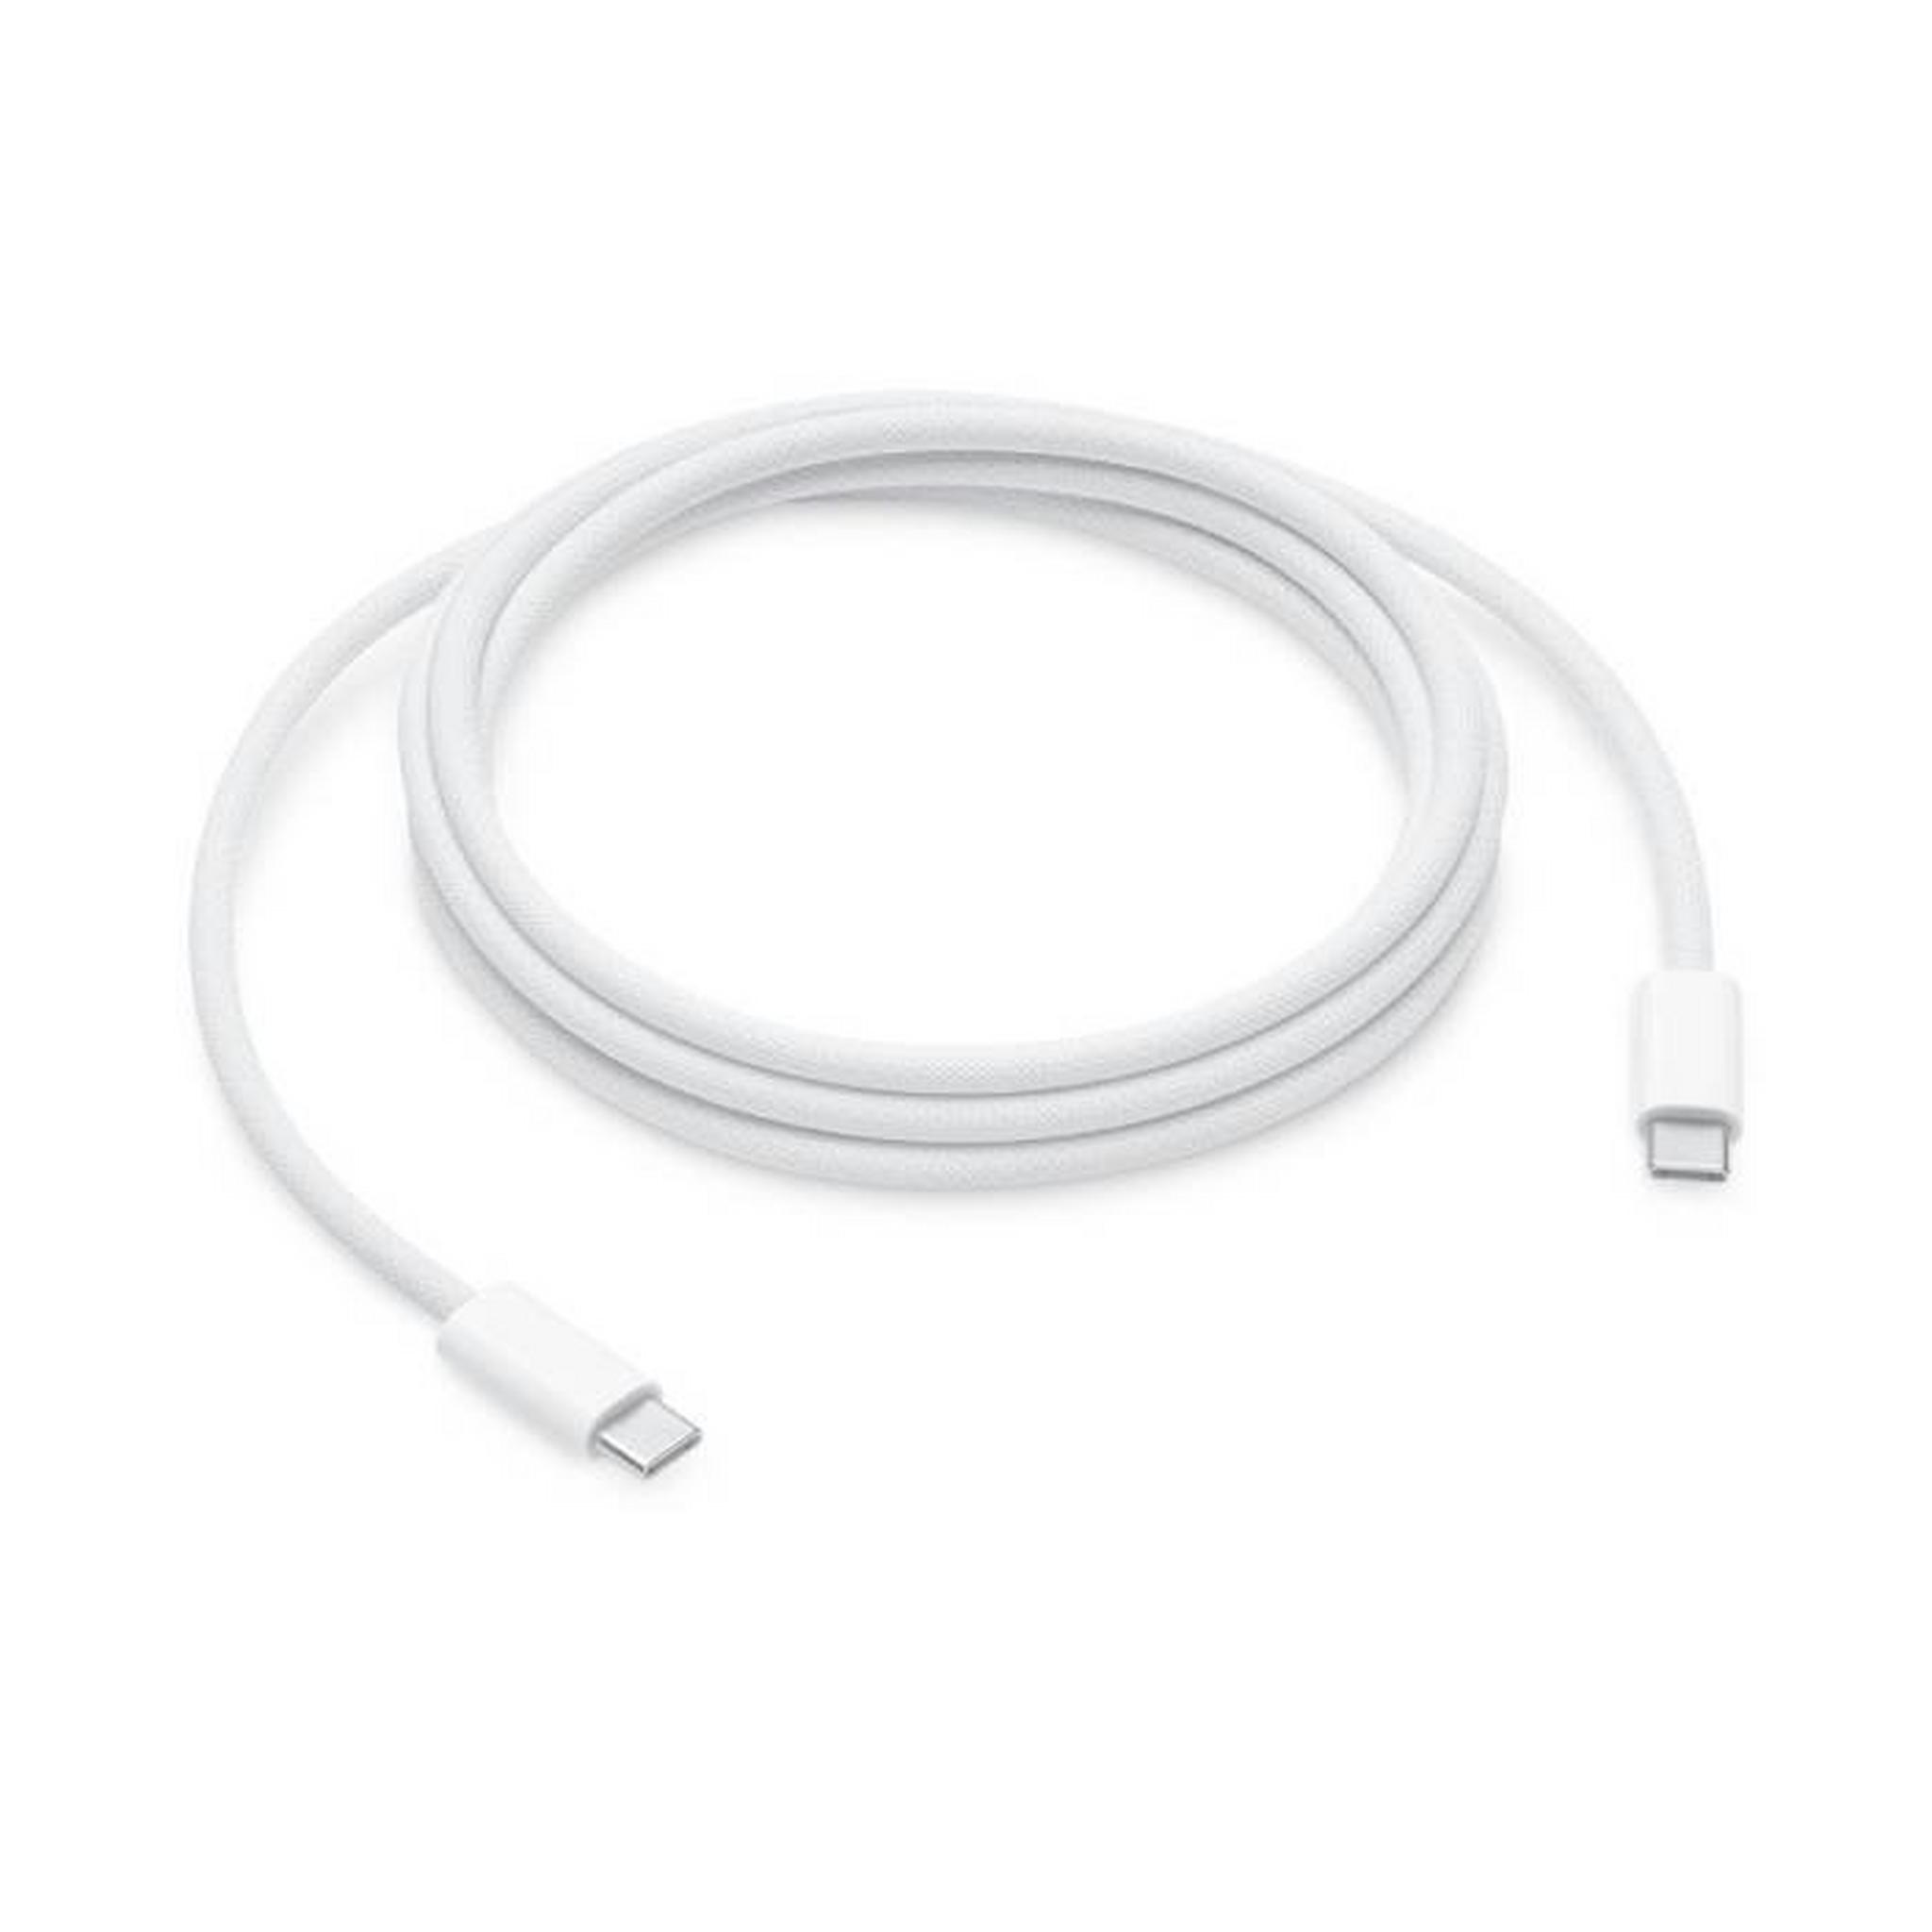 APPLE USB-C Charge Cable 2M, 240W, MU2G3ZM/A - White